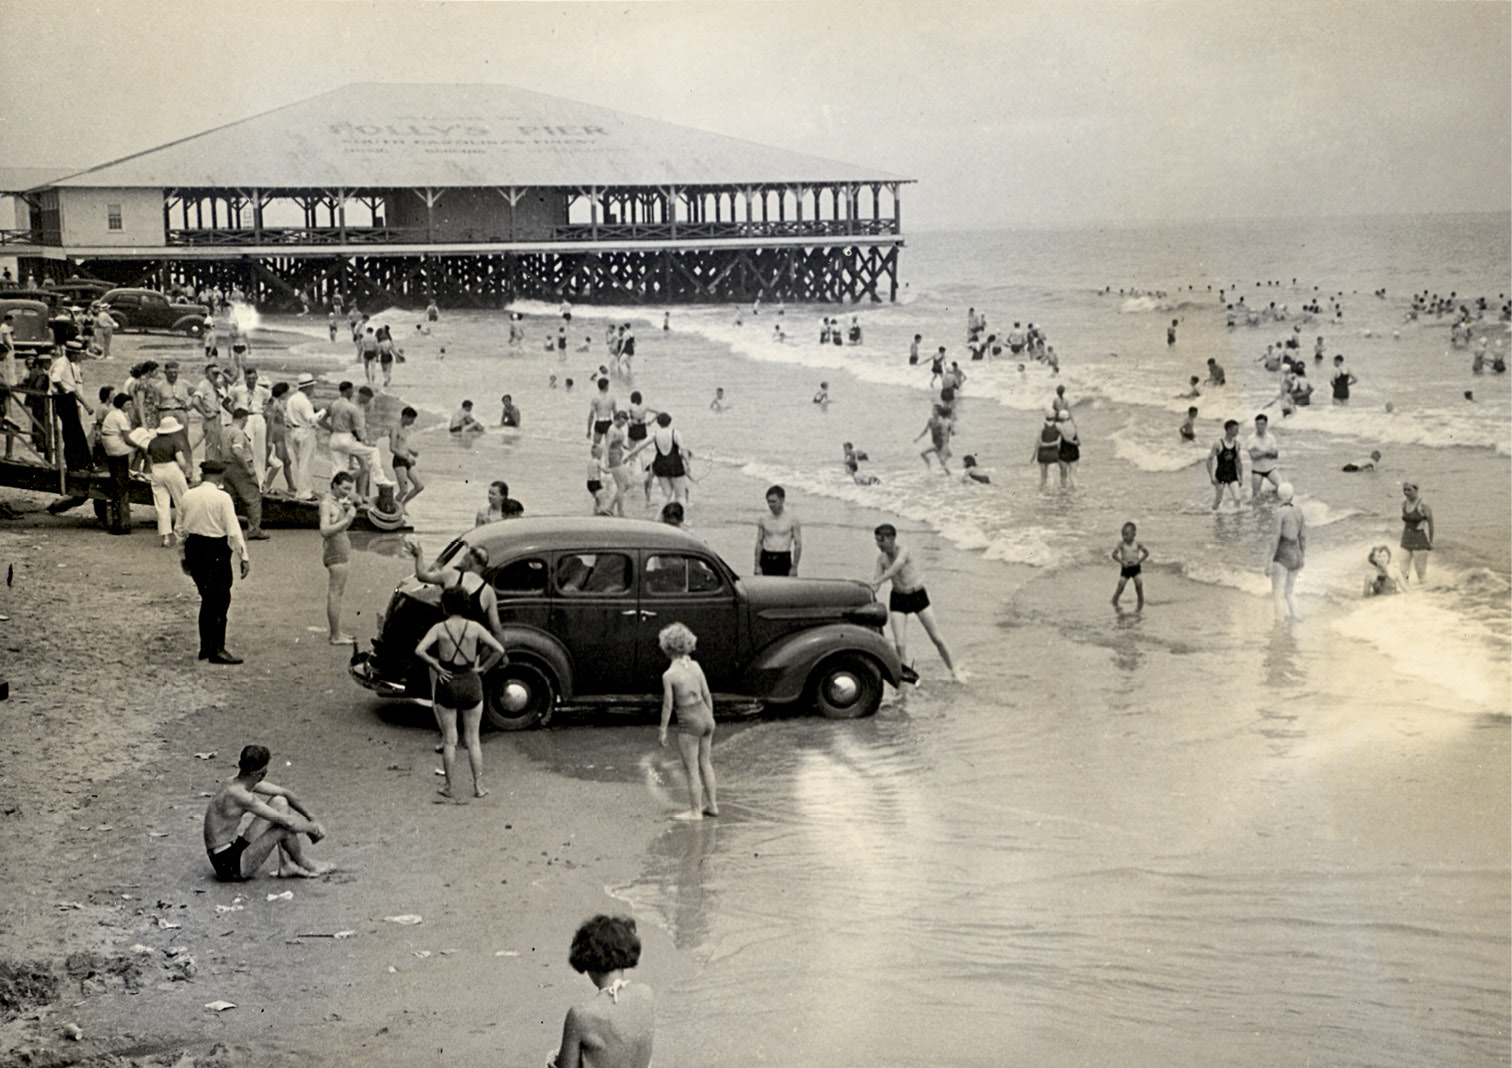 A car parked on the beach gets caught in the incoming tide, circa 1950.